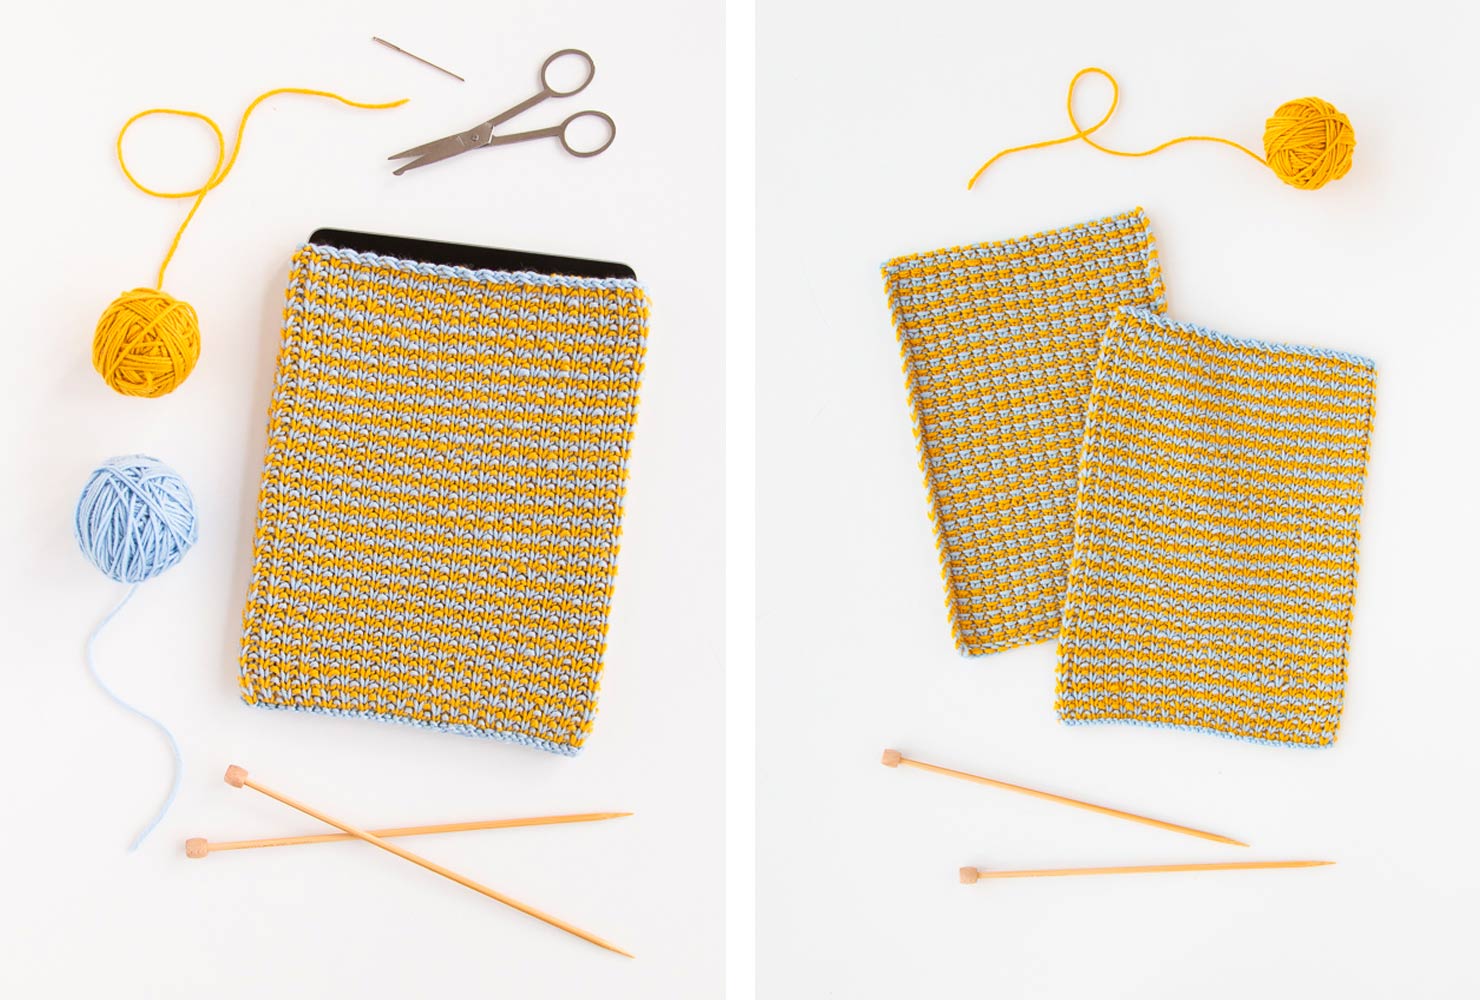 Knitted case with tablet inside.